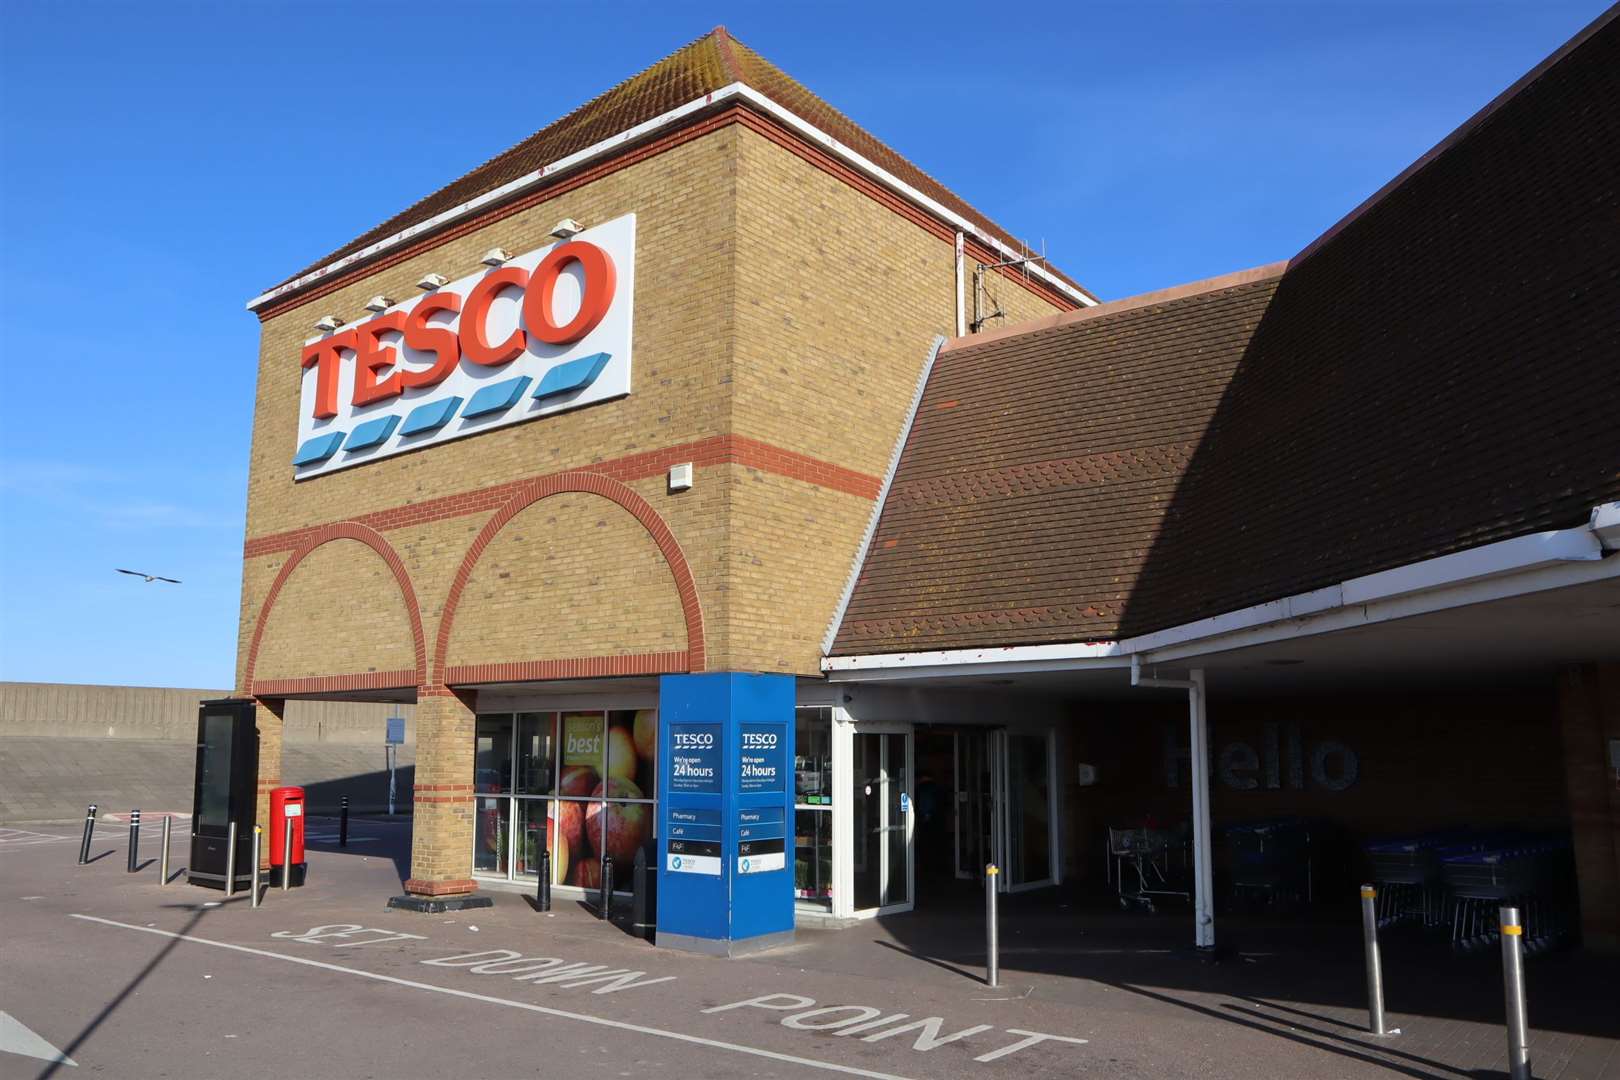 Tesco, which has a store in Sheerness, won a legal battle to block Aldi from opening